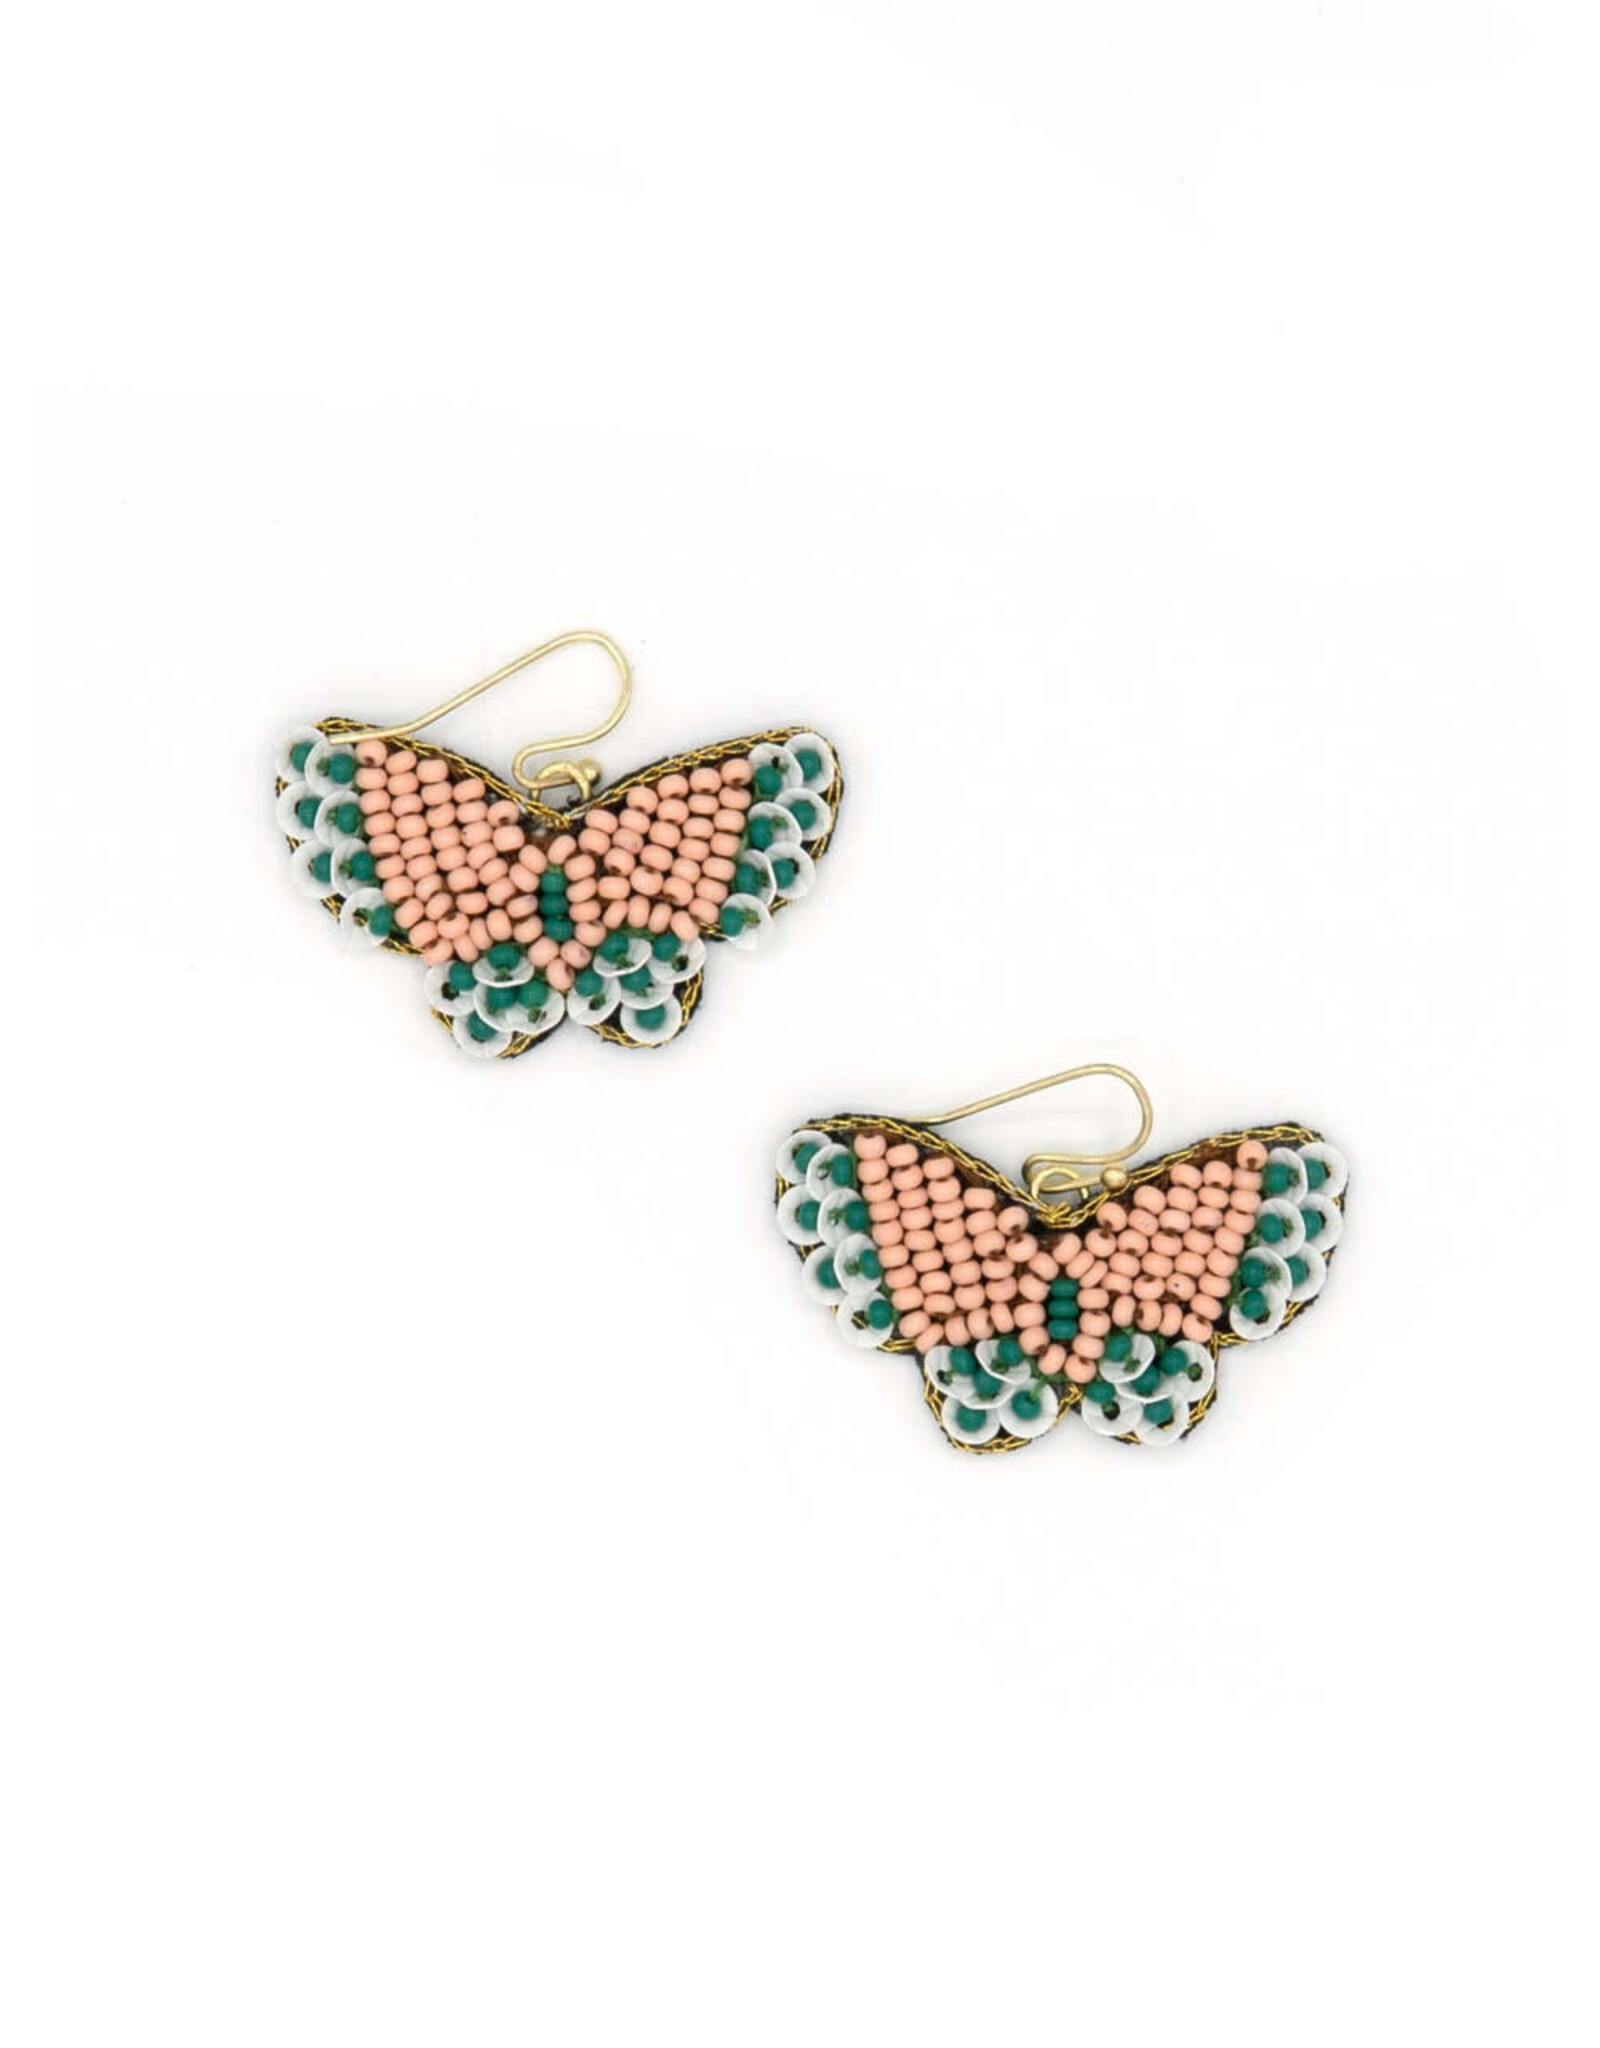 India Beaded Butterfly Earrings, India